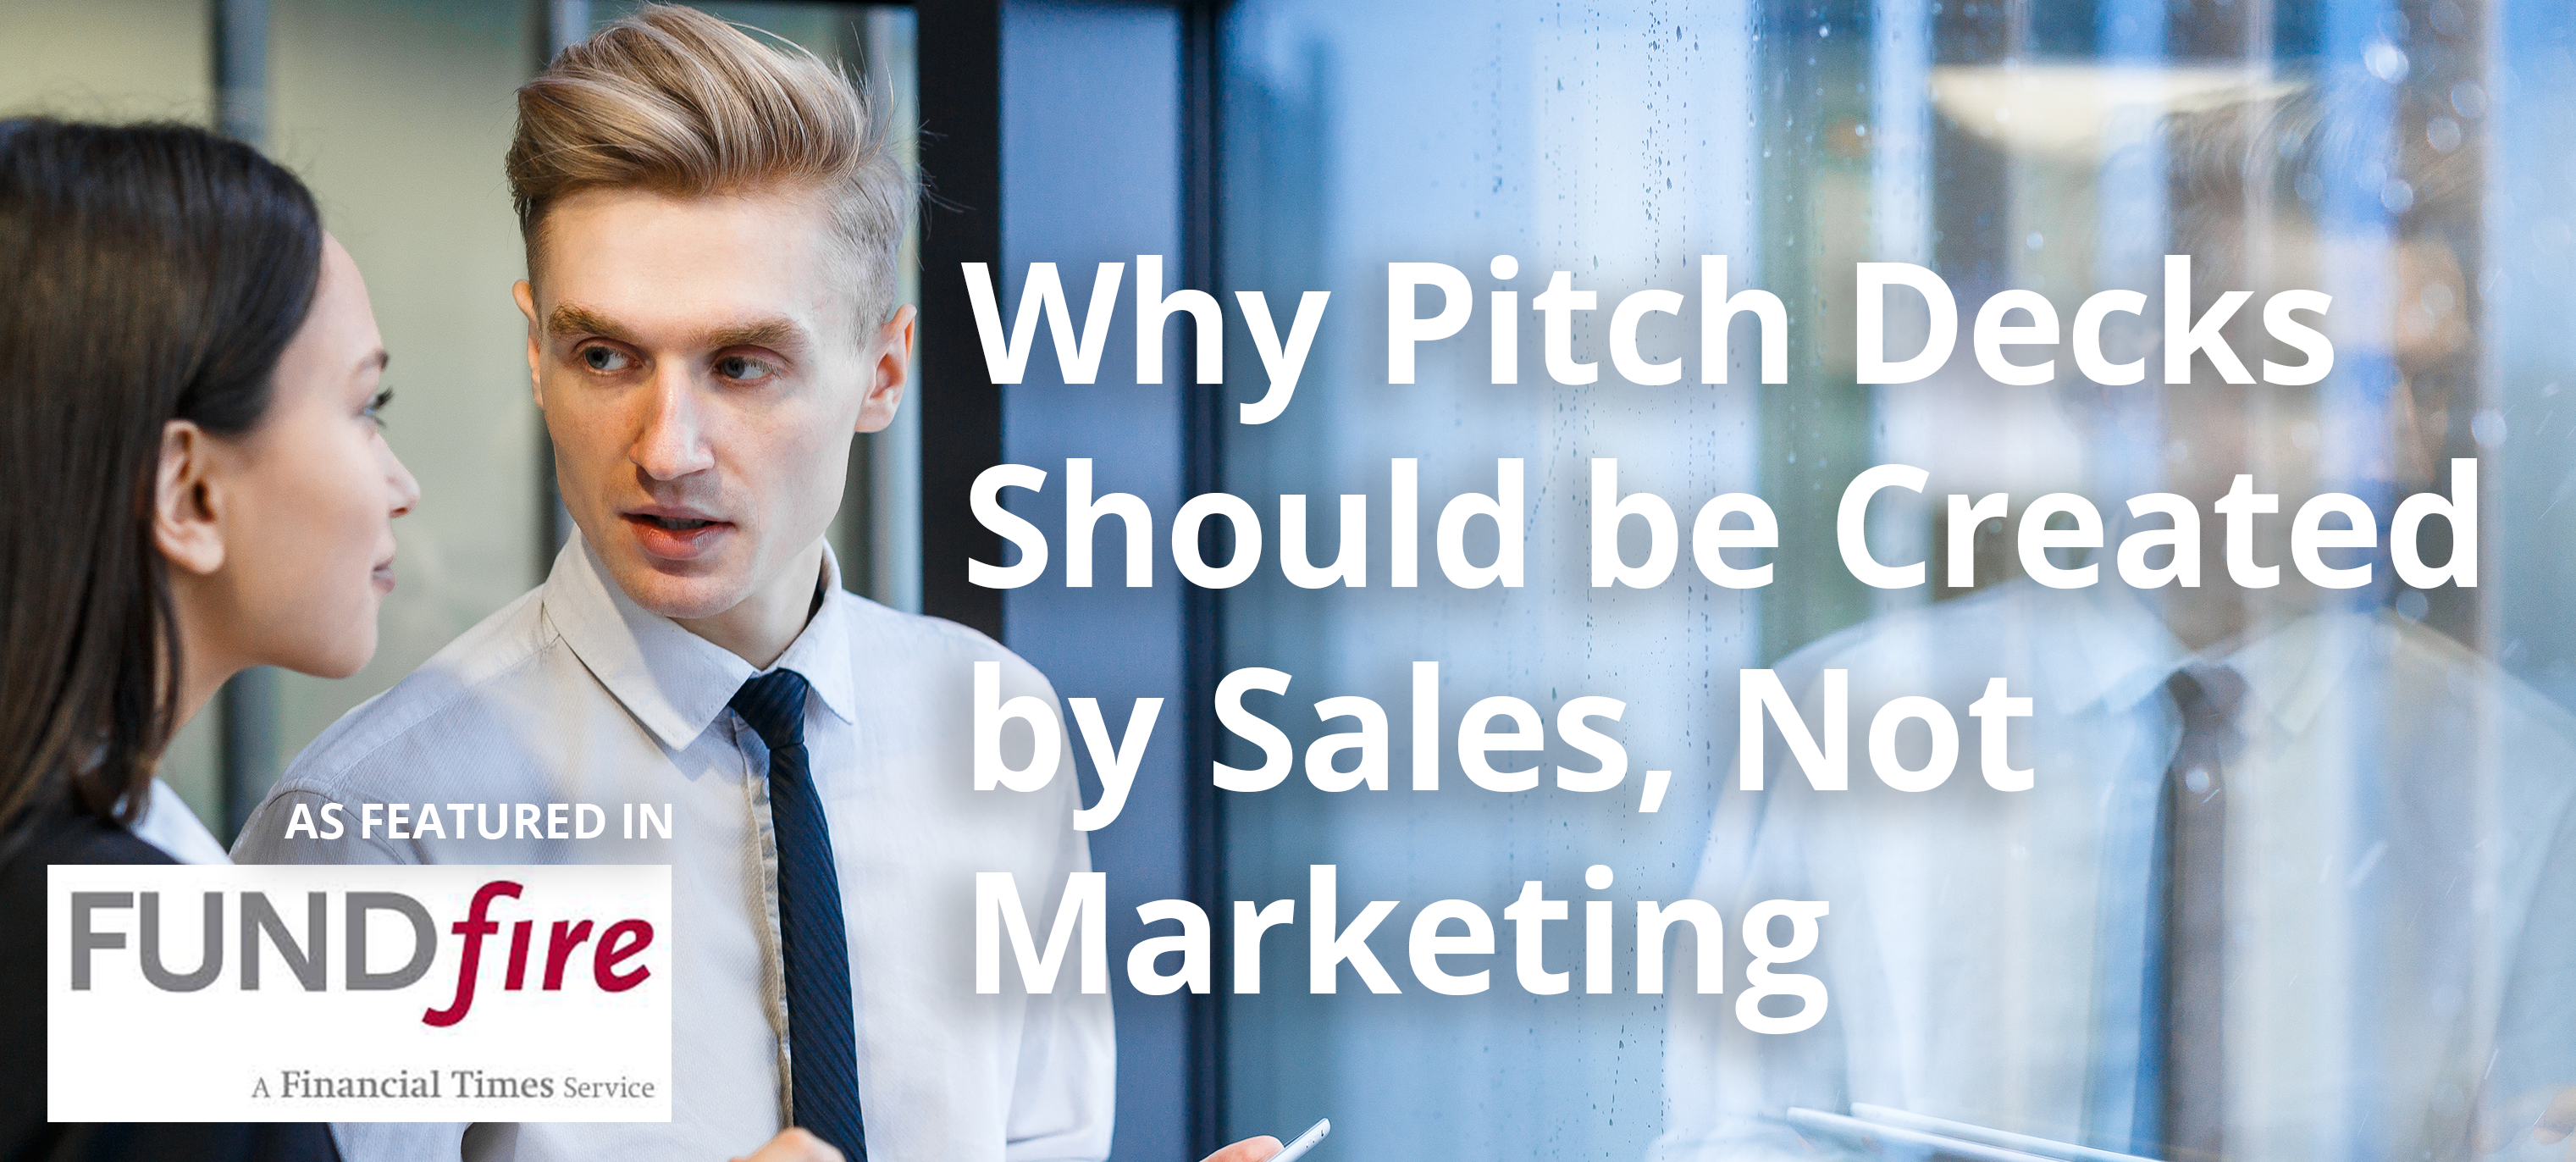 Why Pitch Decks Should be Created by Sales, Not Marketing in FundFire and The Importance of Compliance Controls